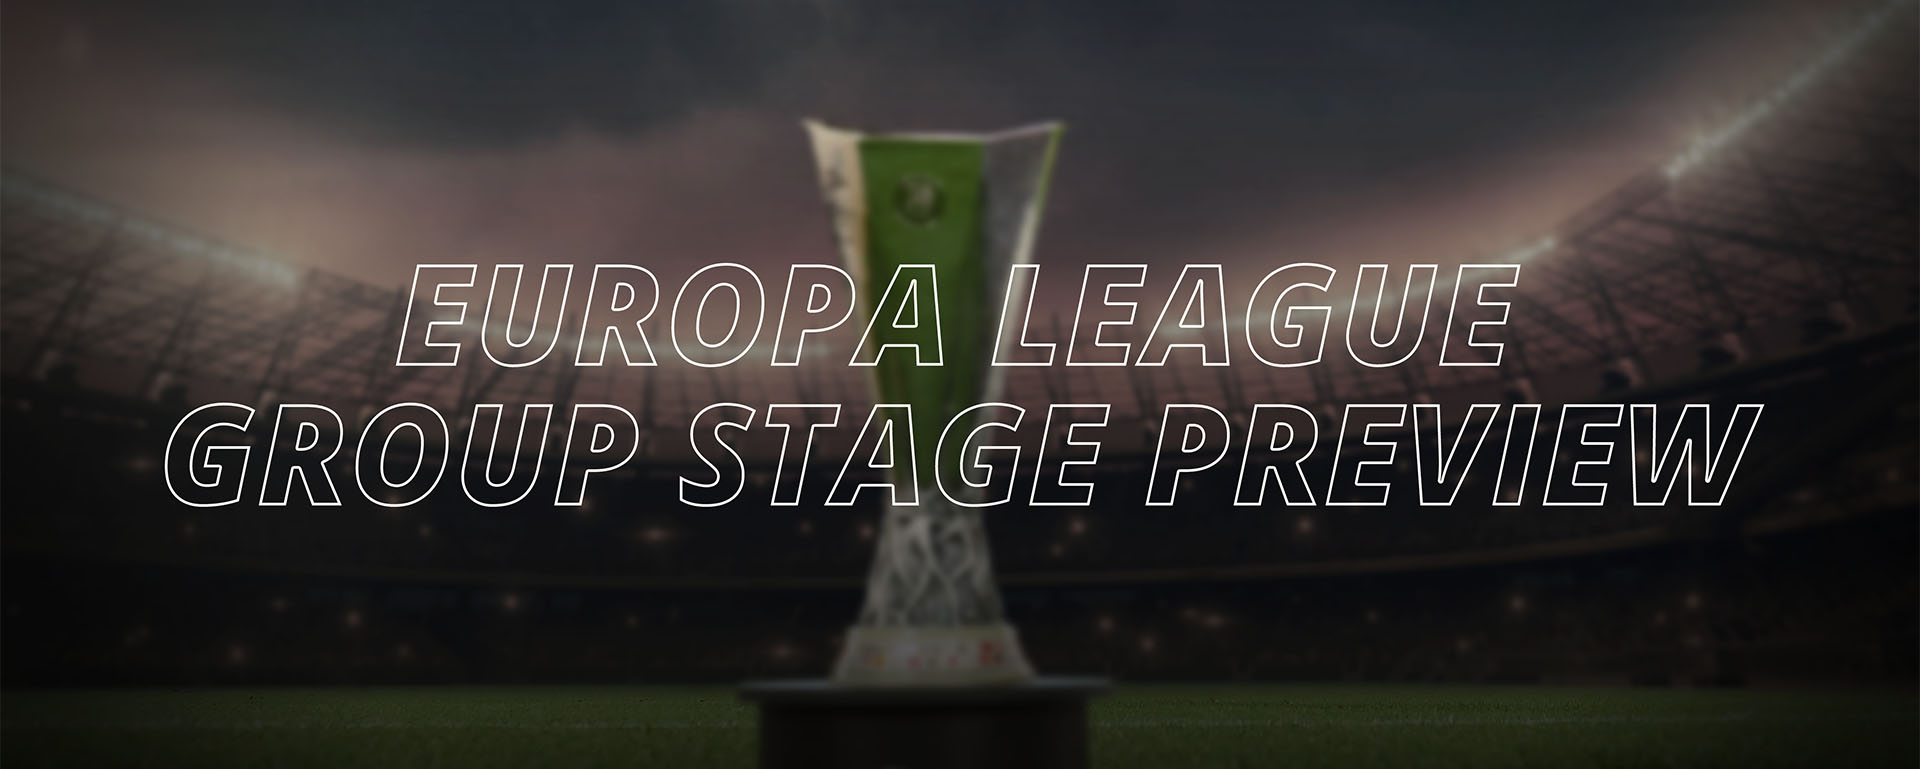 EUROPA LEAGUE GROUP STAGE PREVIEW